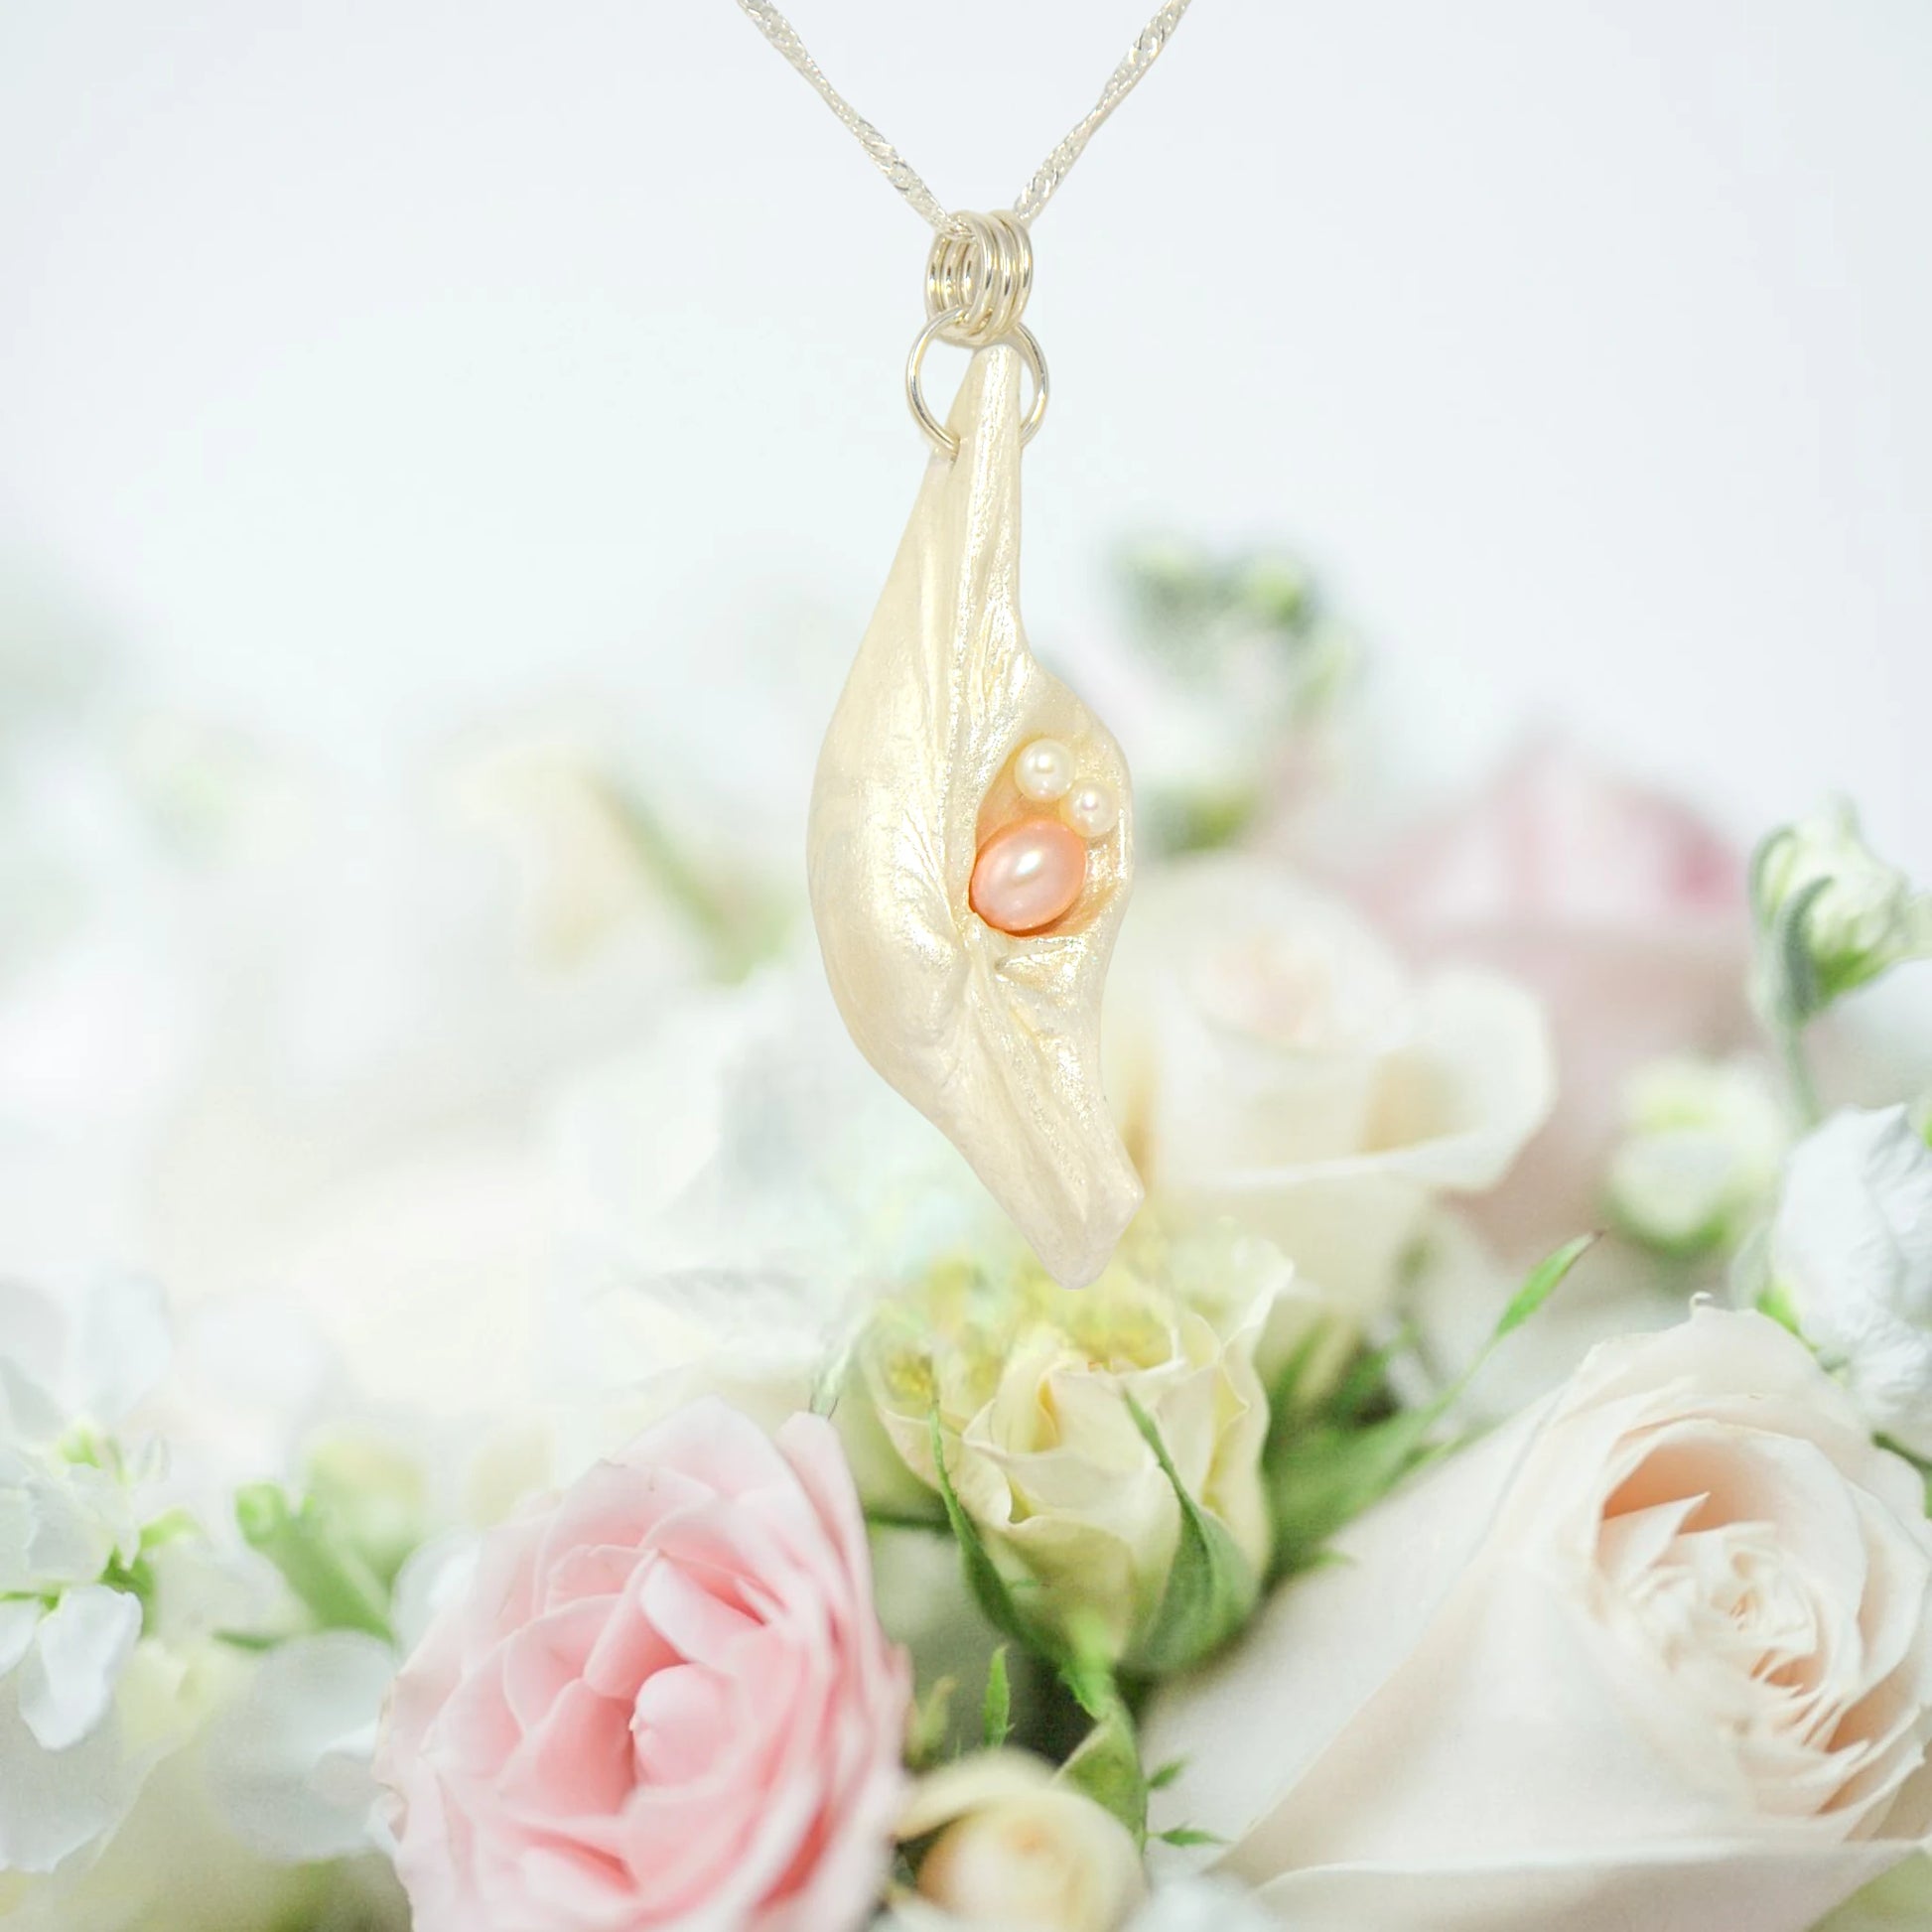 This natural seashell pendant has a real 7-8mm pink freshwater pearl and two baby pearls. The pendant is shown hanging from a chain over top a bouquet of pink and white roses.